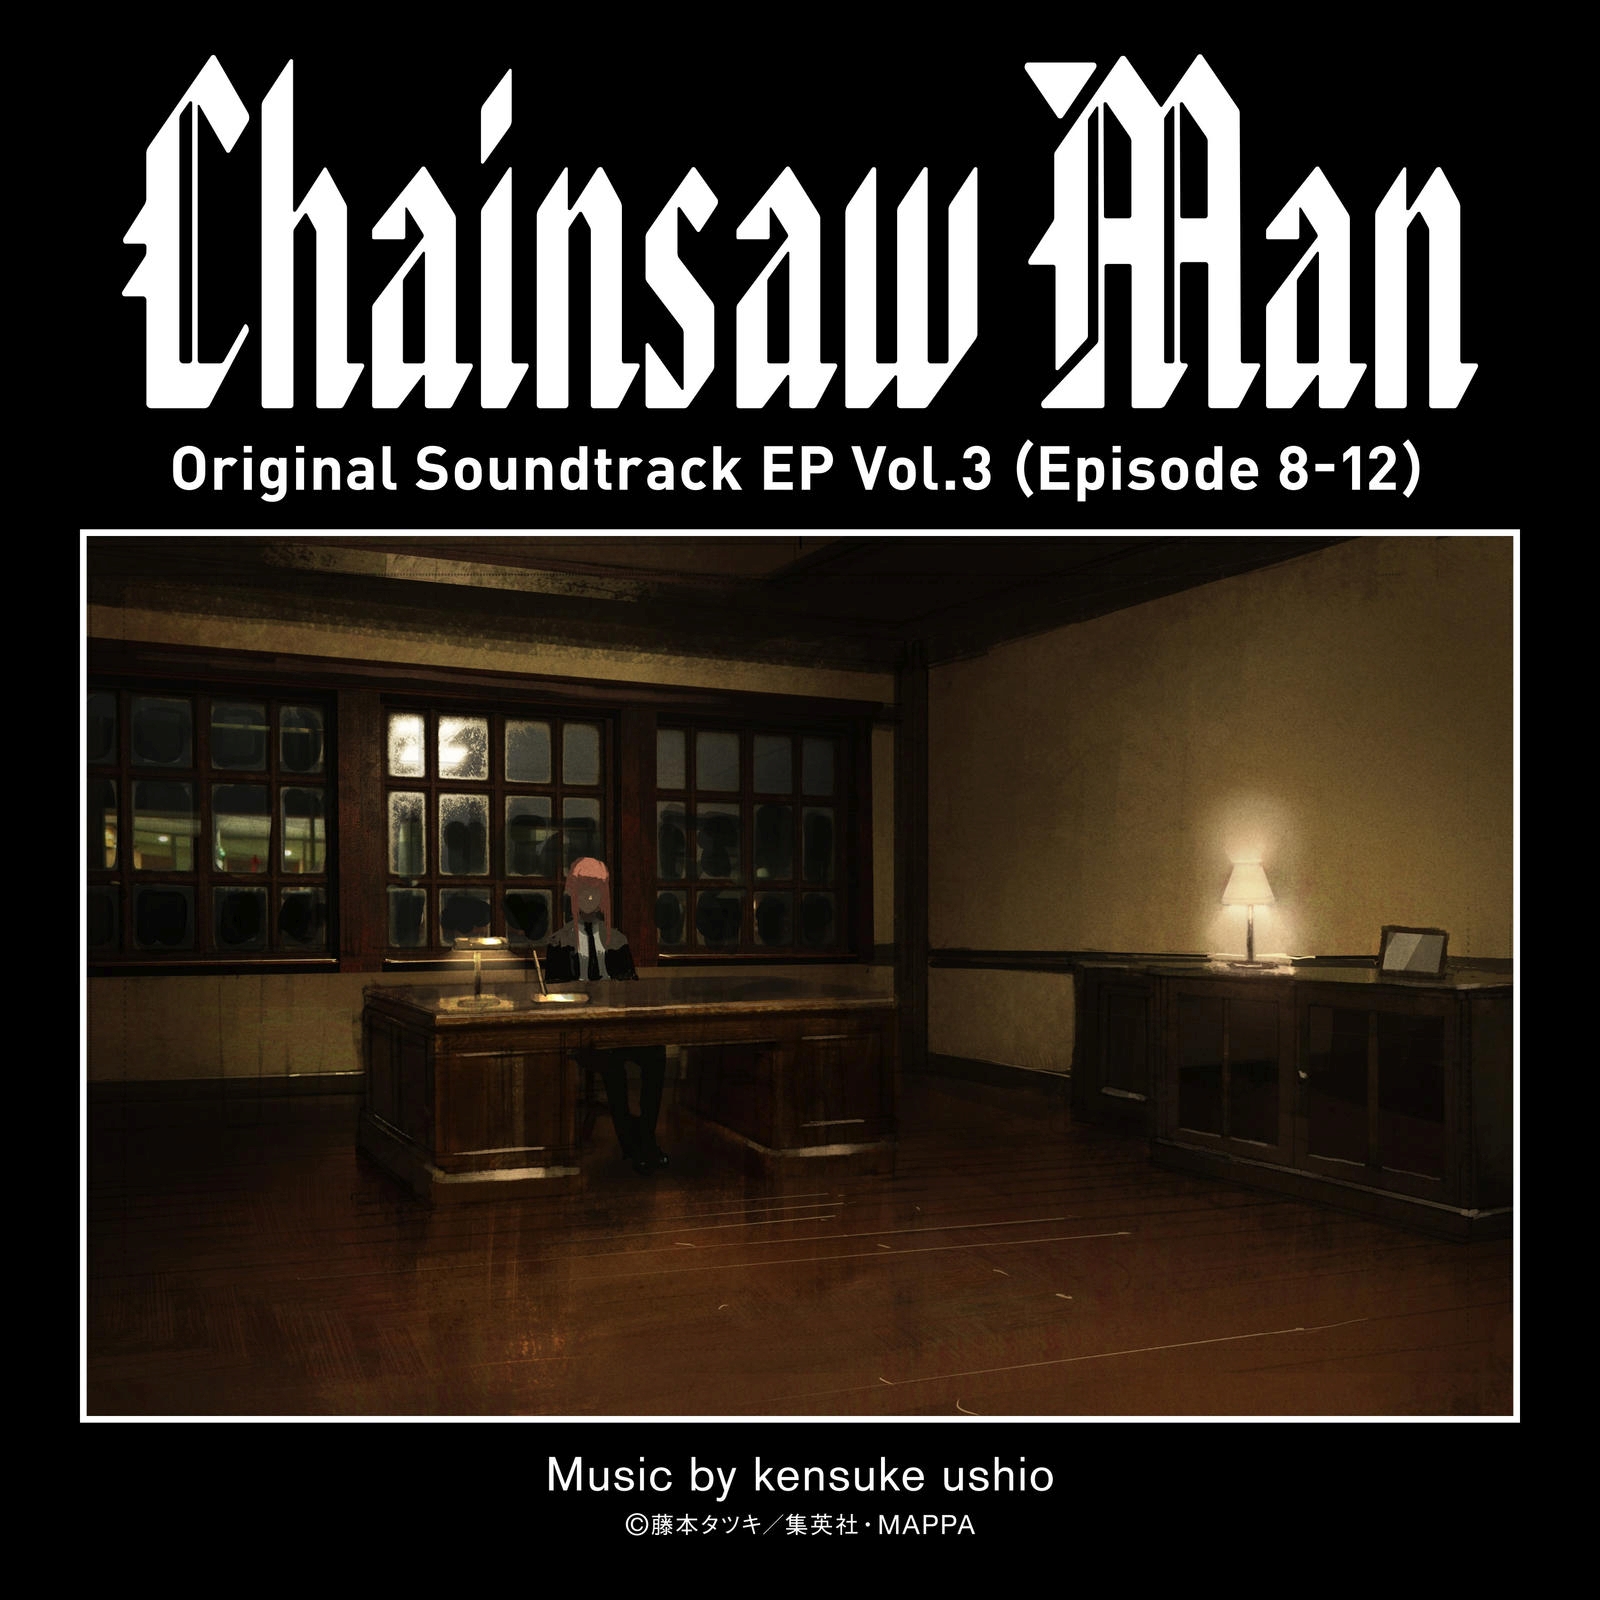 Chainsaw Man Volume 3 OST EP Available Now